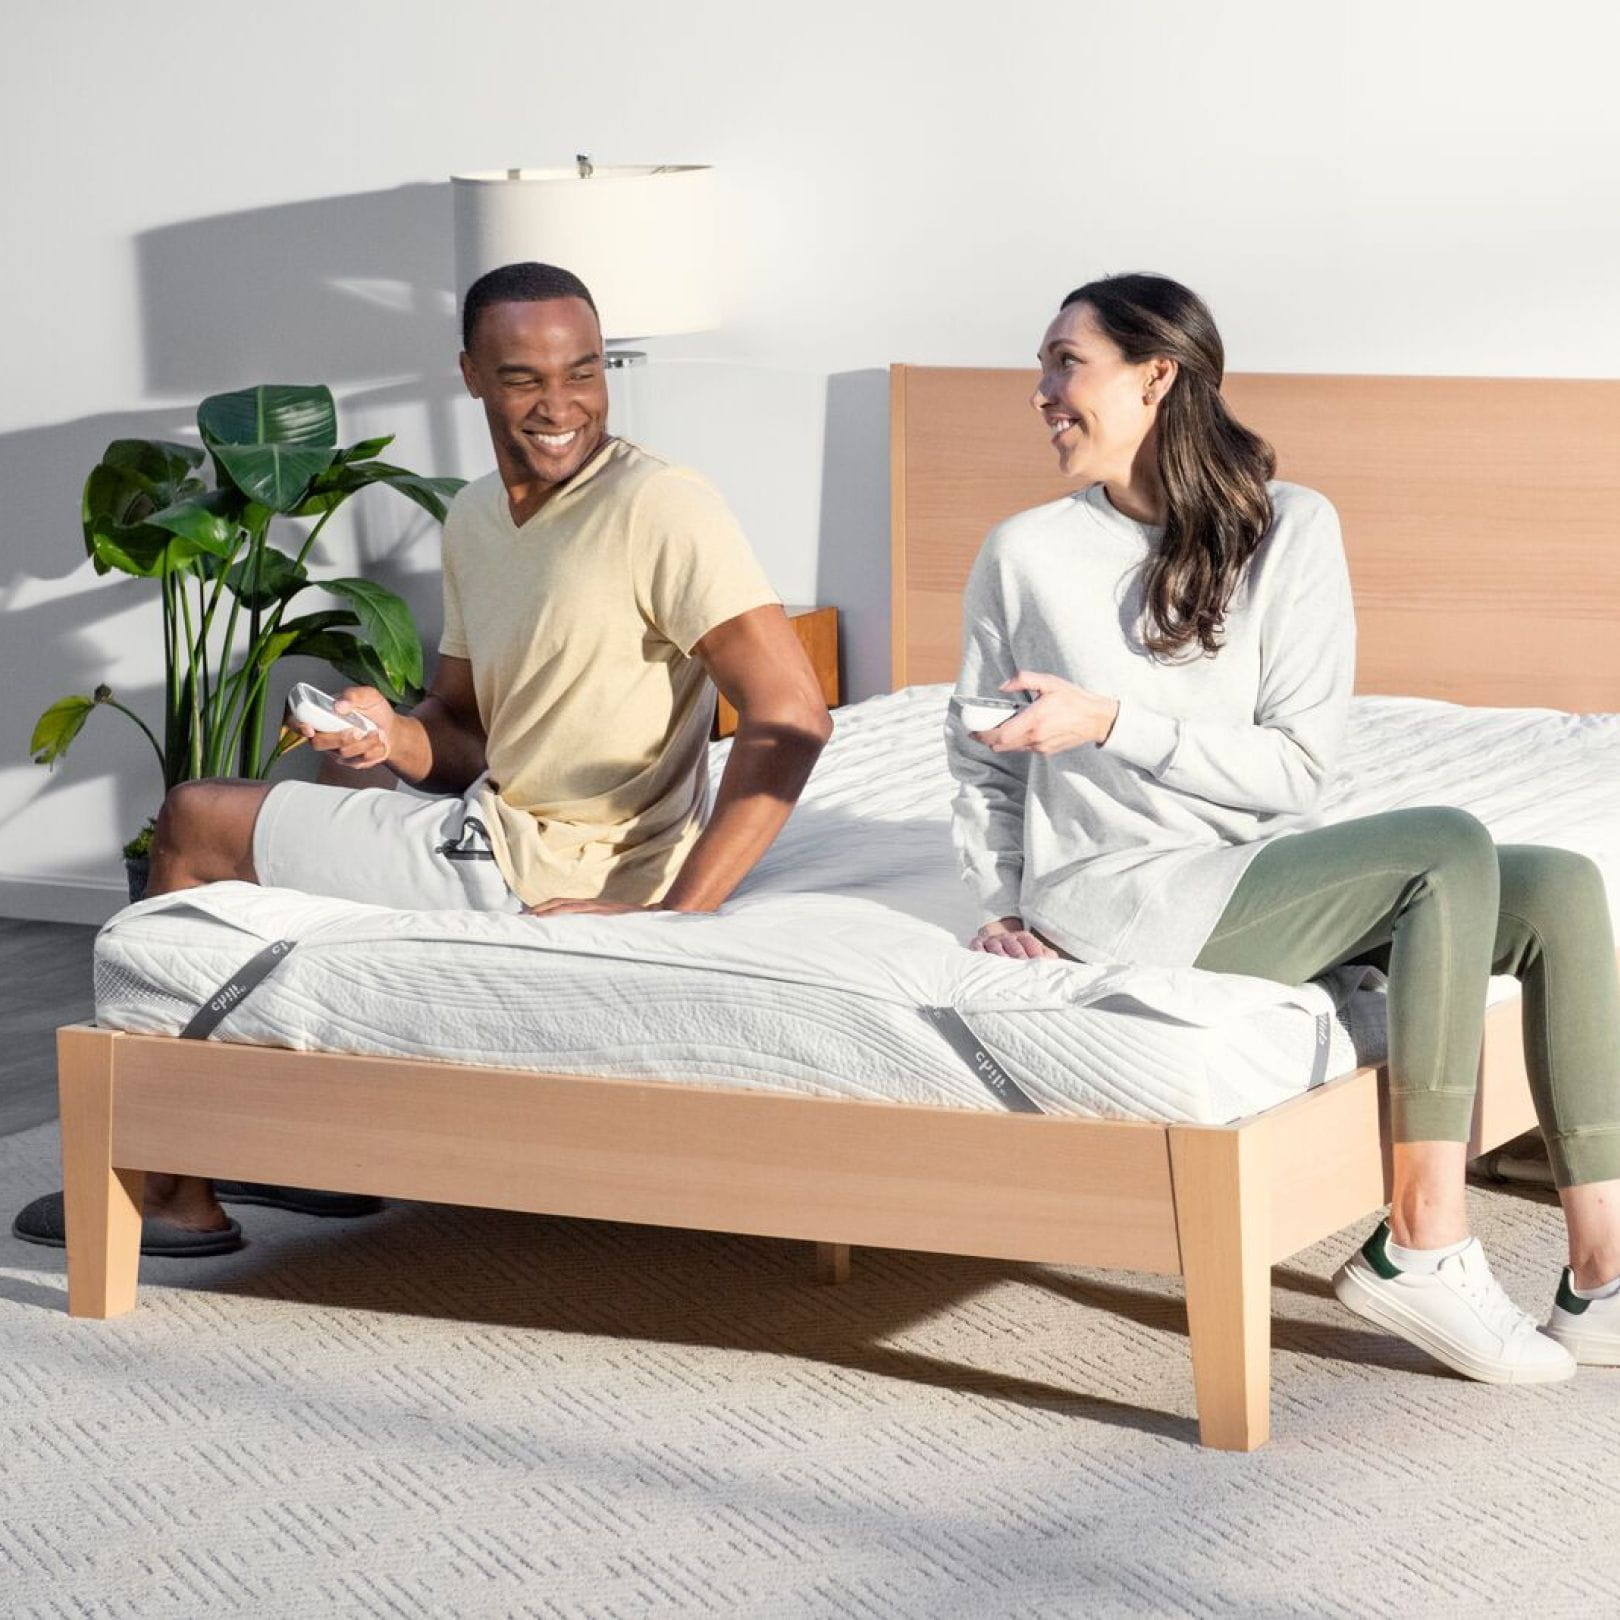 How to choose couple friendly mattress at reasonable prices